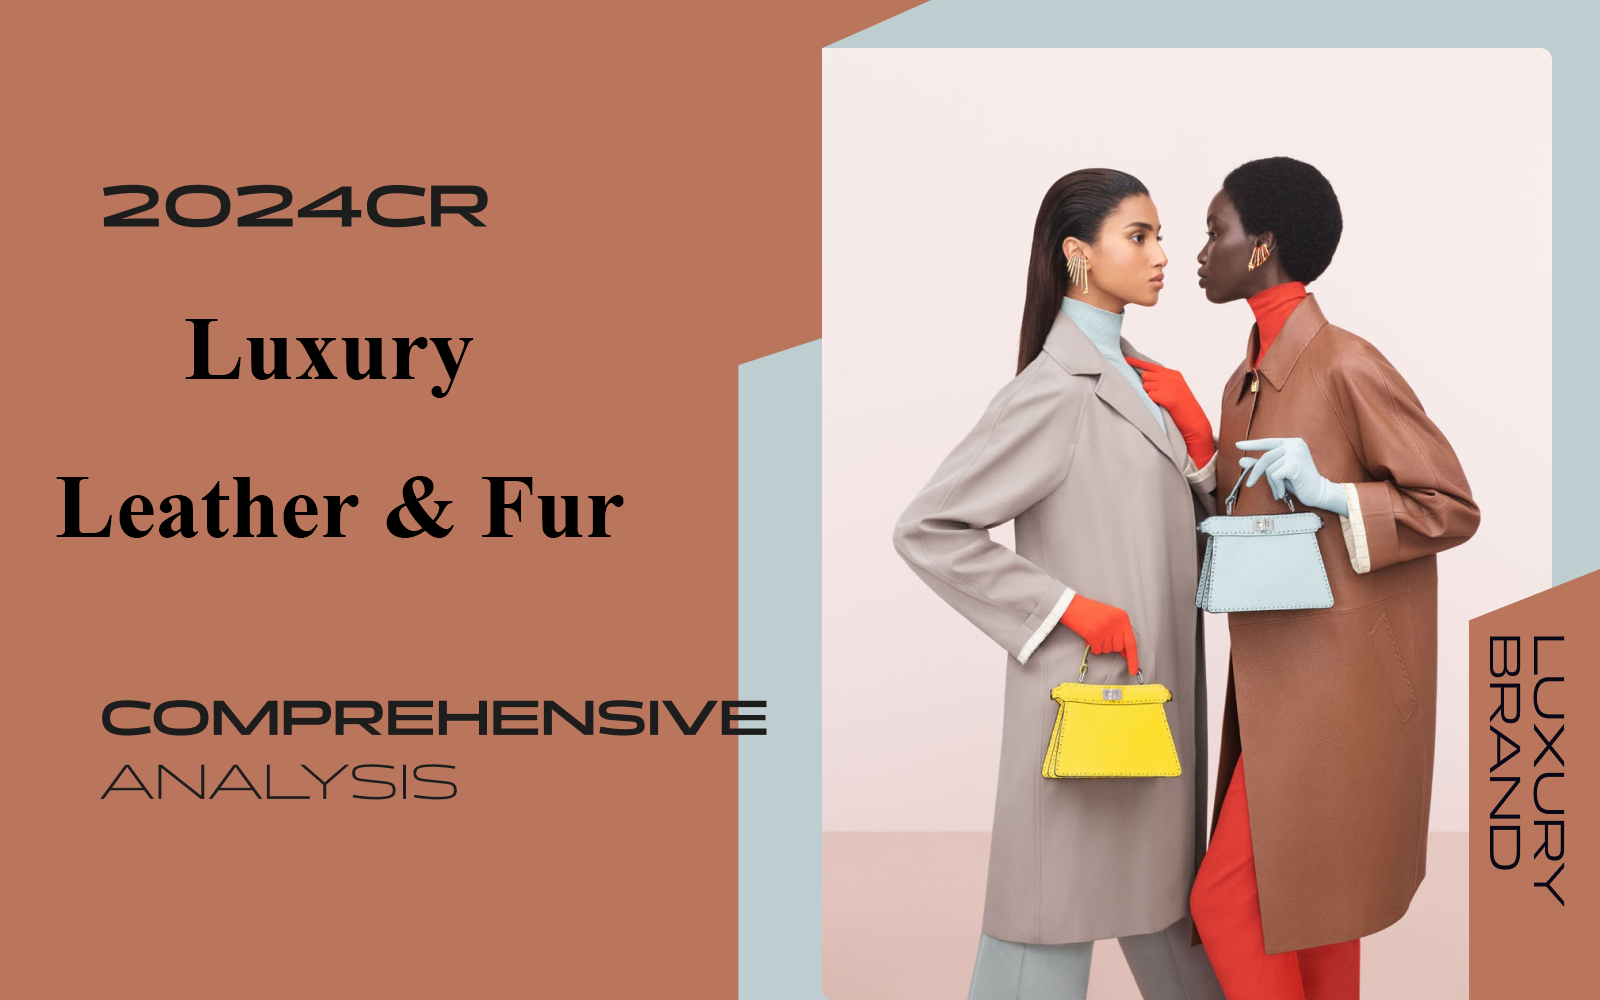 The Comprehensive Analysis of Women's Luxury Leather & Fur Brands